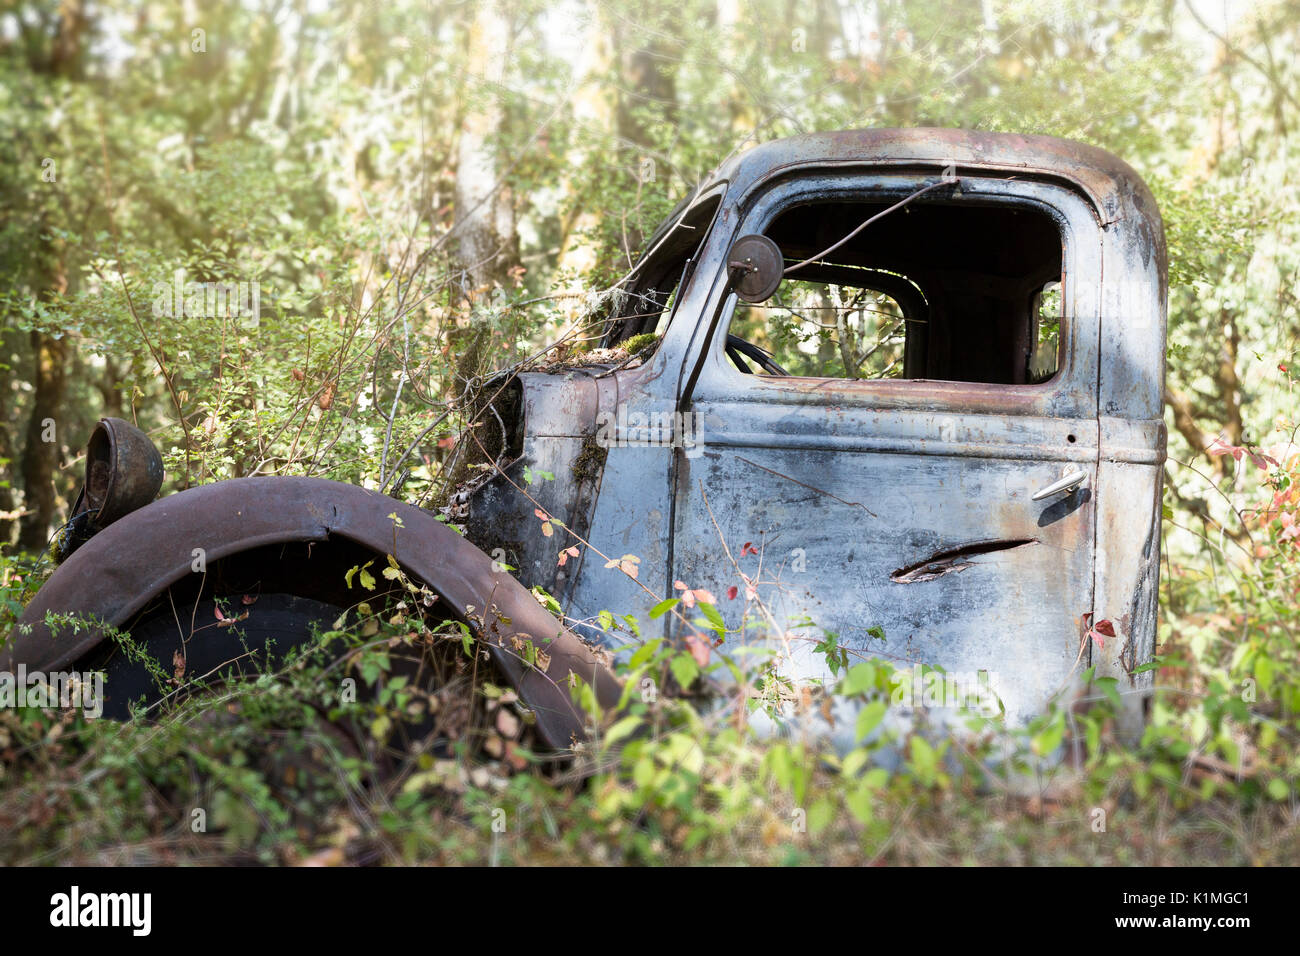 Abandoned rusted truck sitting in the trees with brush growing up around it Stock Photo